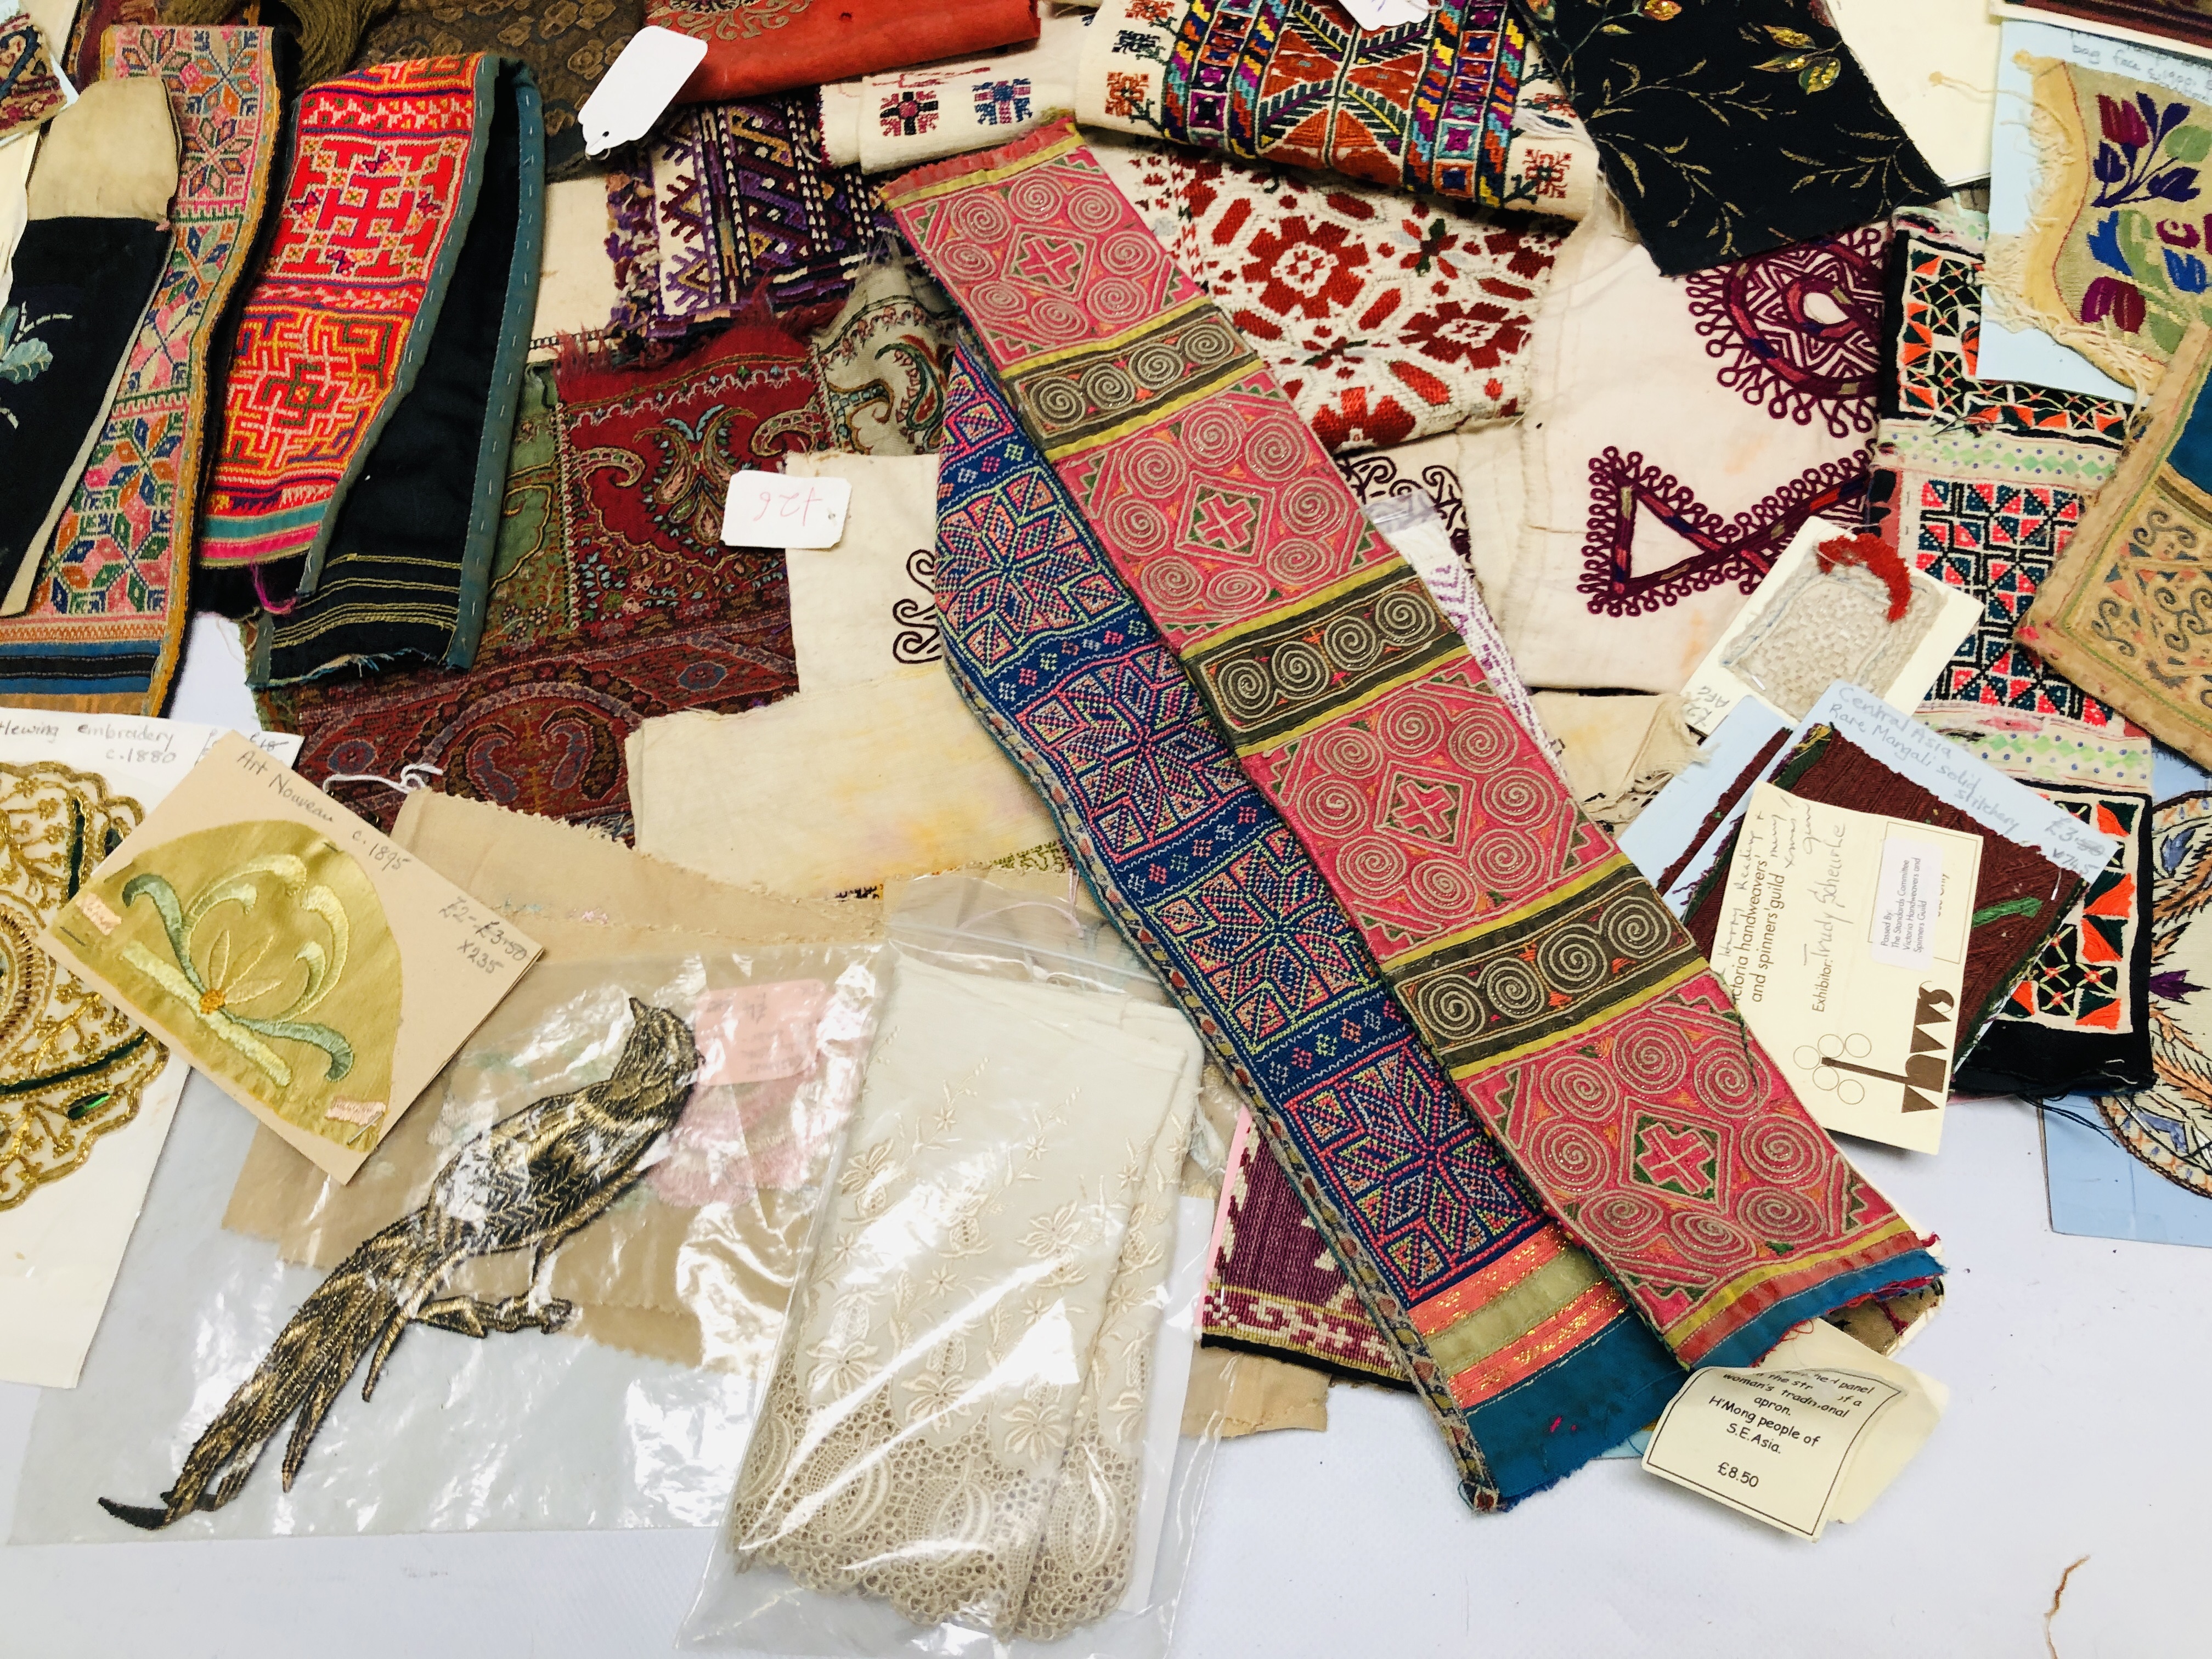 TWO BOXES CONTAINING AN EXTENSIVE COLLECTION OF TEXTILES EXAMPLES. - Image 8 of 8